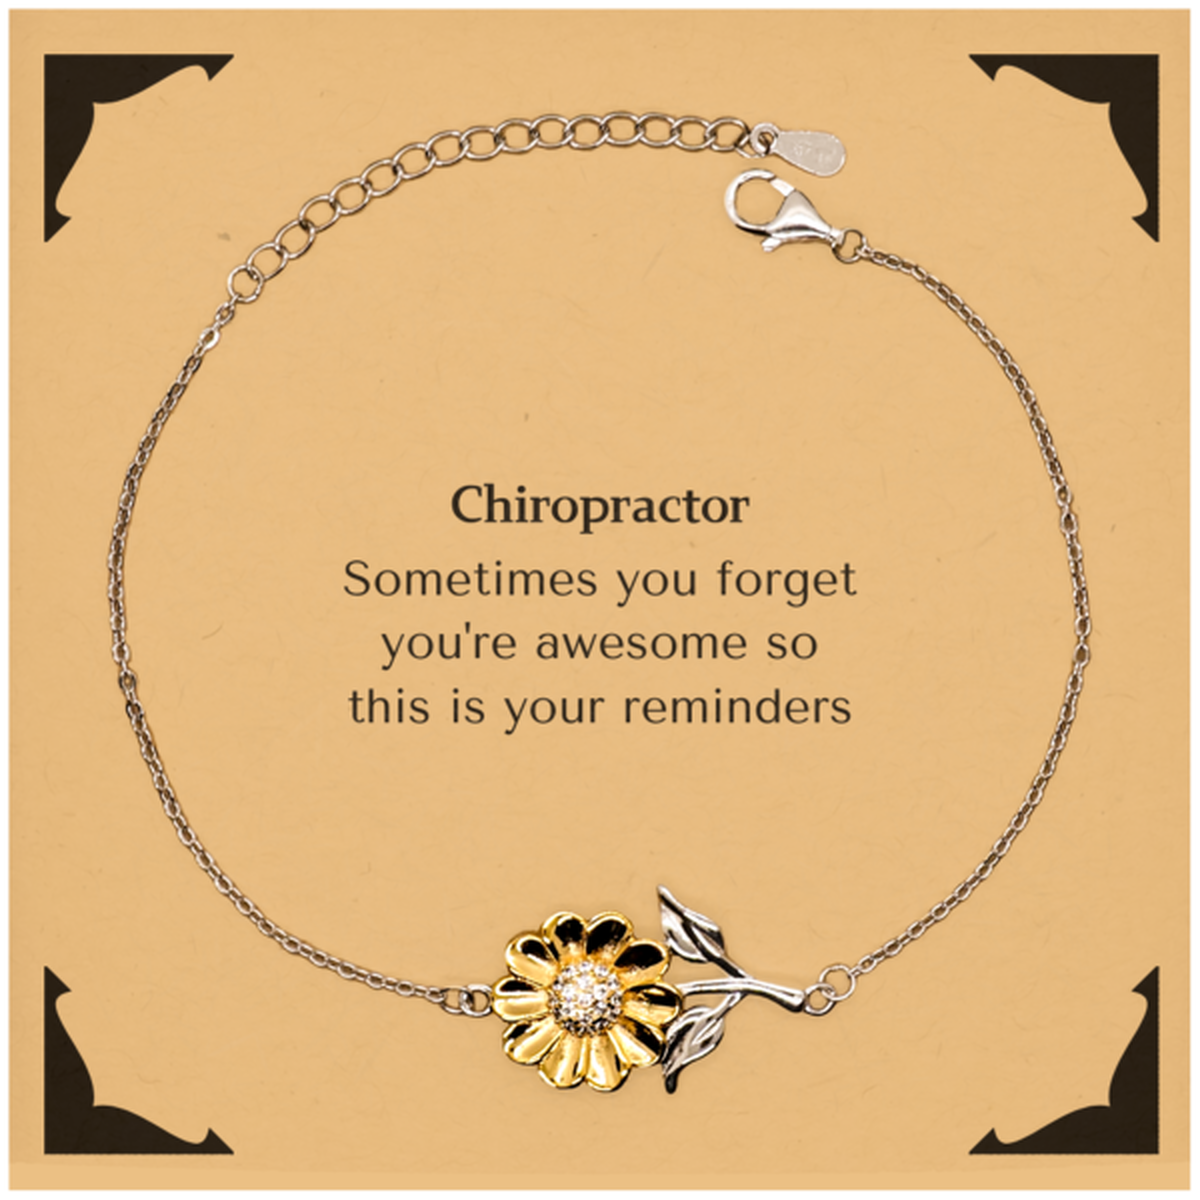 Sentimental Chiropractor Sunflower Bracelet, Chiropractor Sometimes you forget you're awesome so this is your reminders, Graduation Christmas Birthday Gifts for Chiropractor, Men, Women, Coworkers